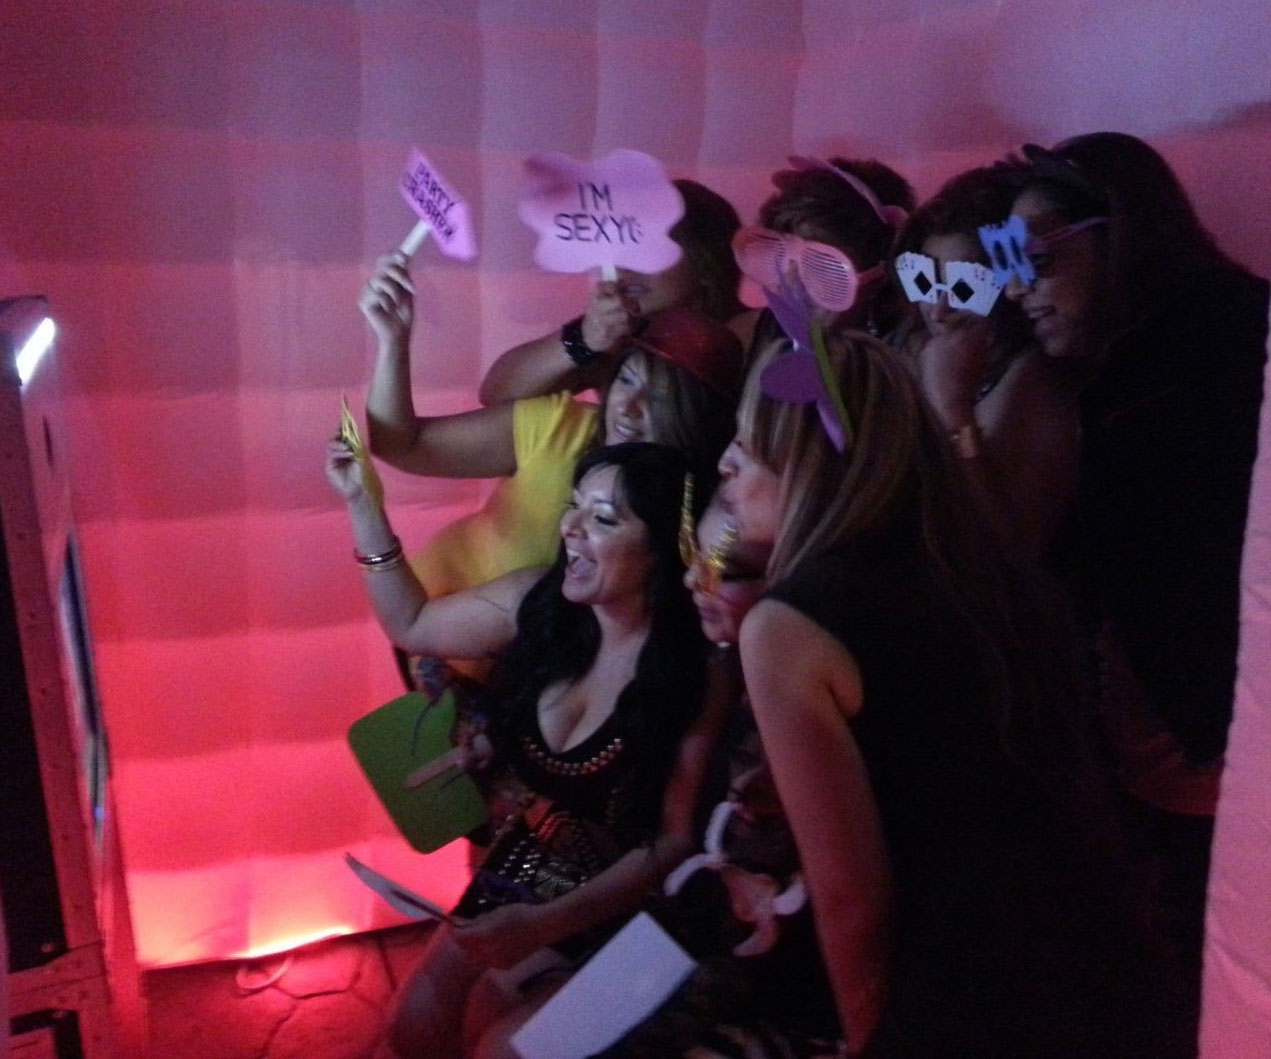 Inflatable LED Photo Booth